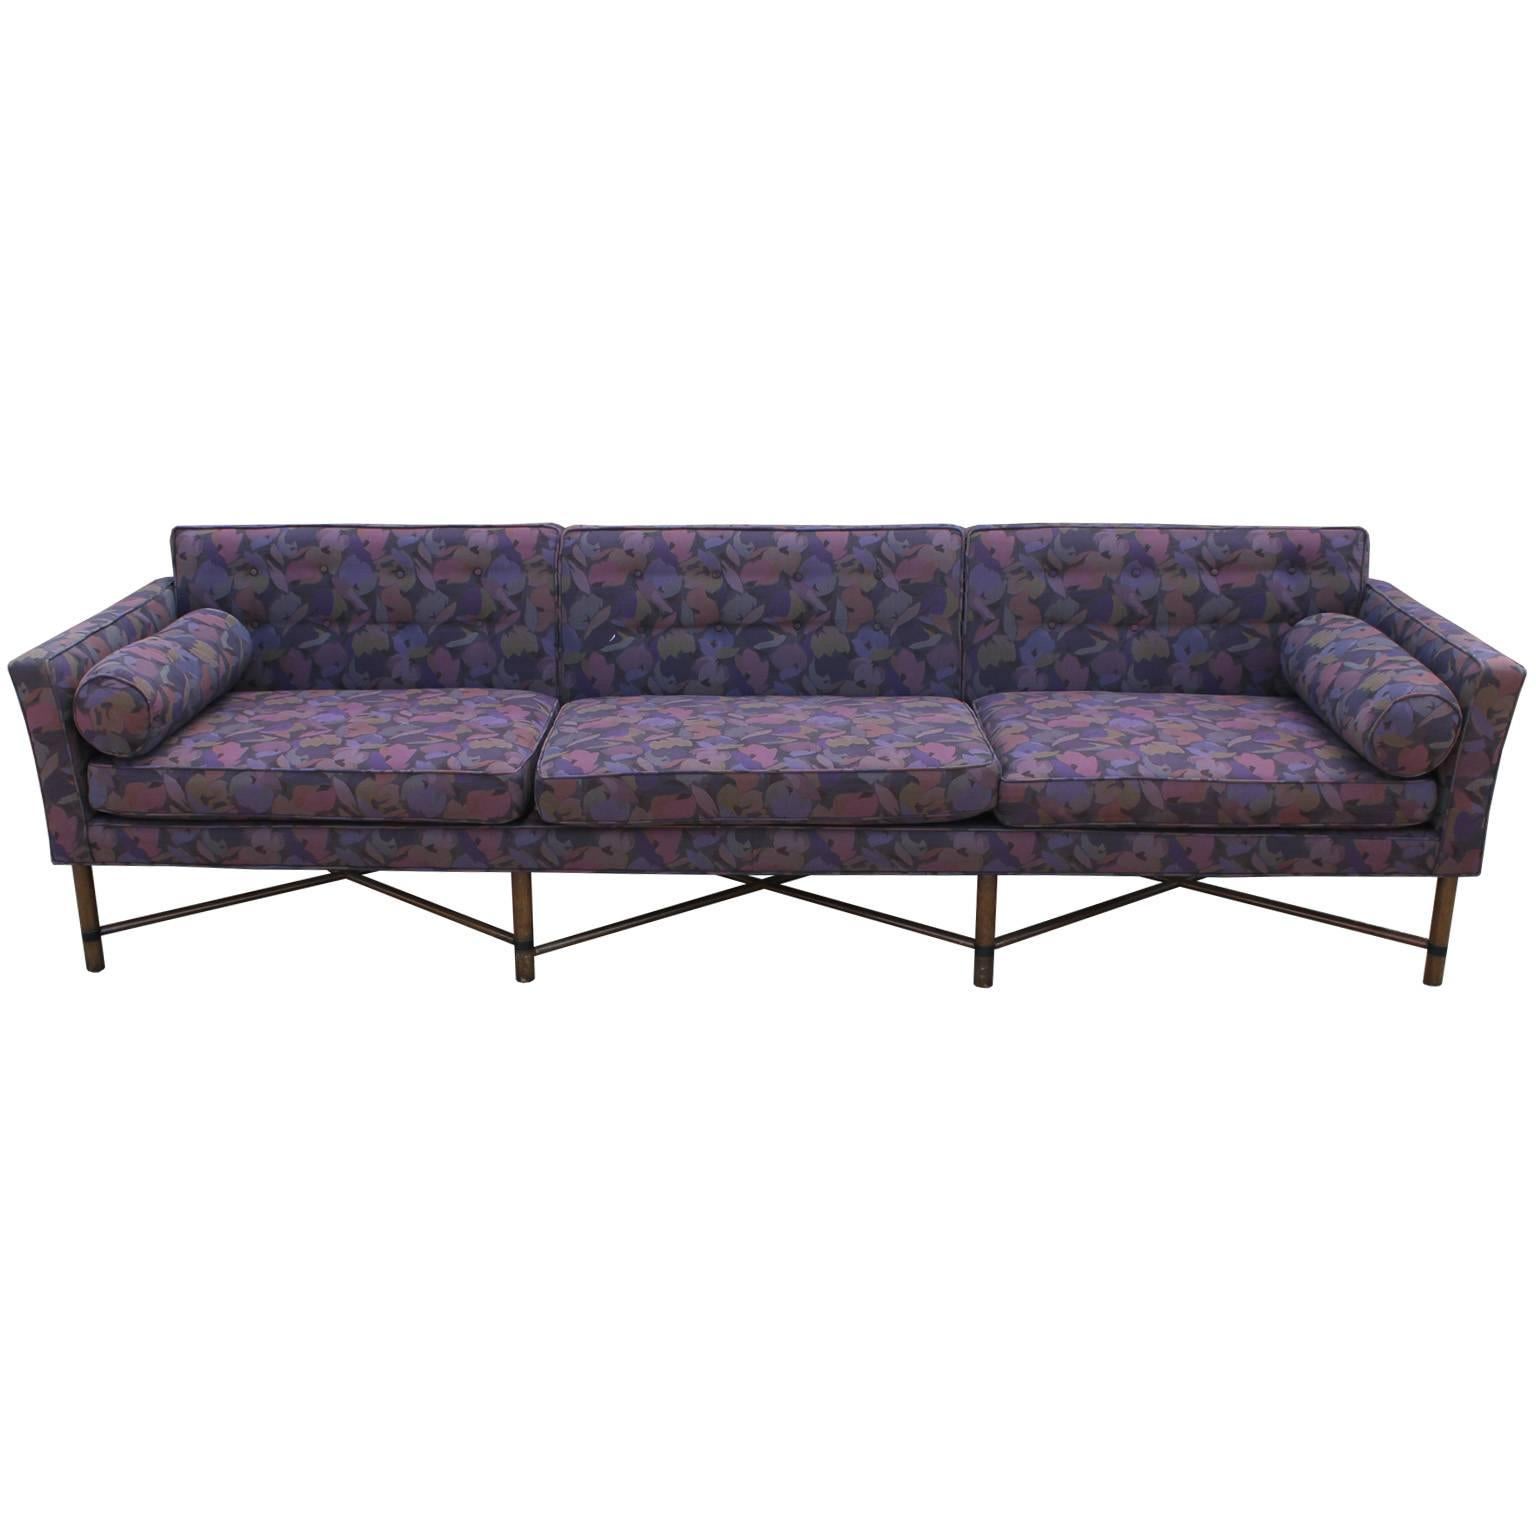 Stunning and rare custom seating group by Harvey Probber. Seating group includes three seat sofa, loveseat. Both sofas feature criss cross stretchers with brass accents and bolster pillows. Sofas are upholstered in a vintage purple floral.
The